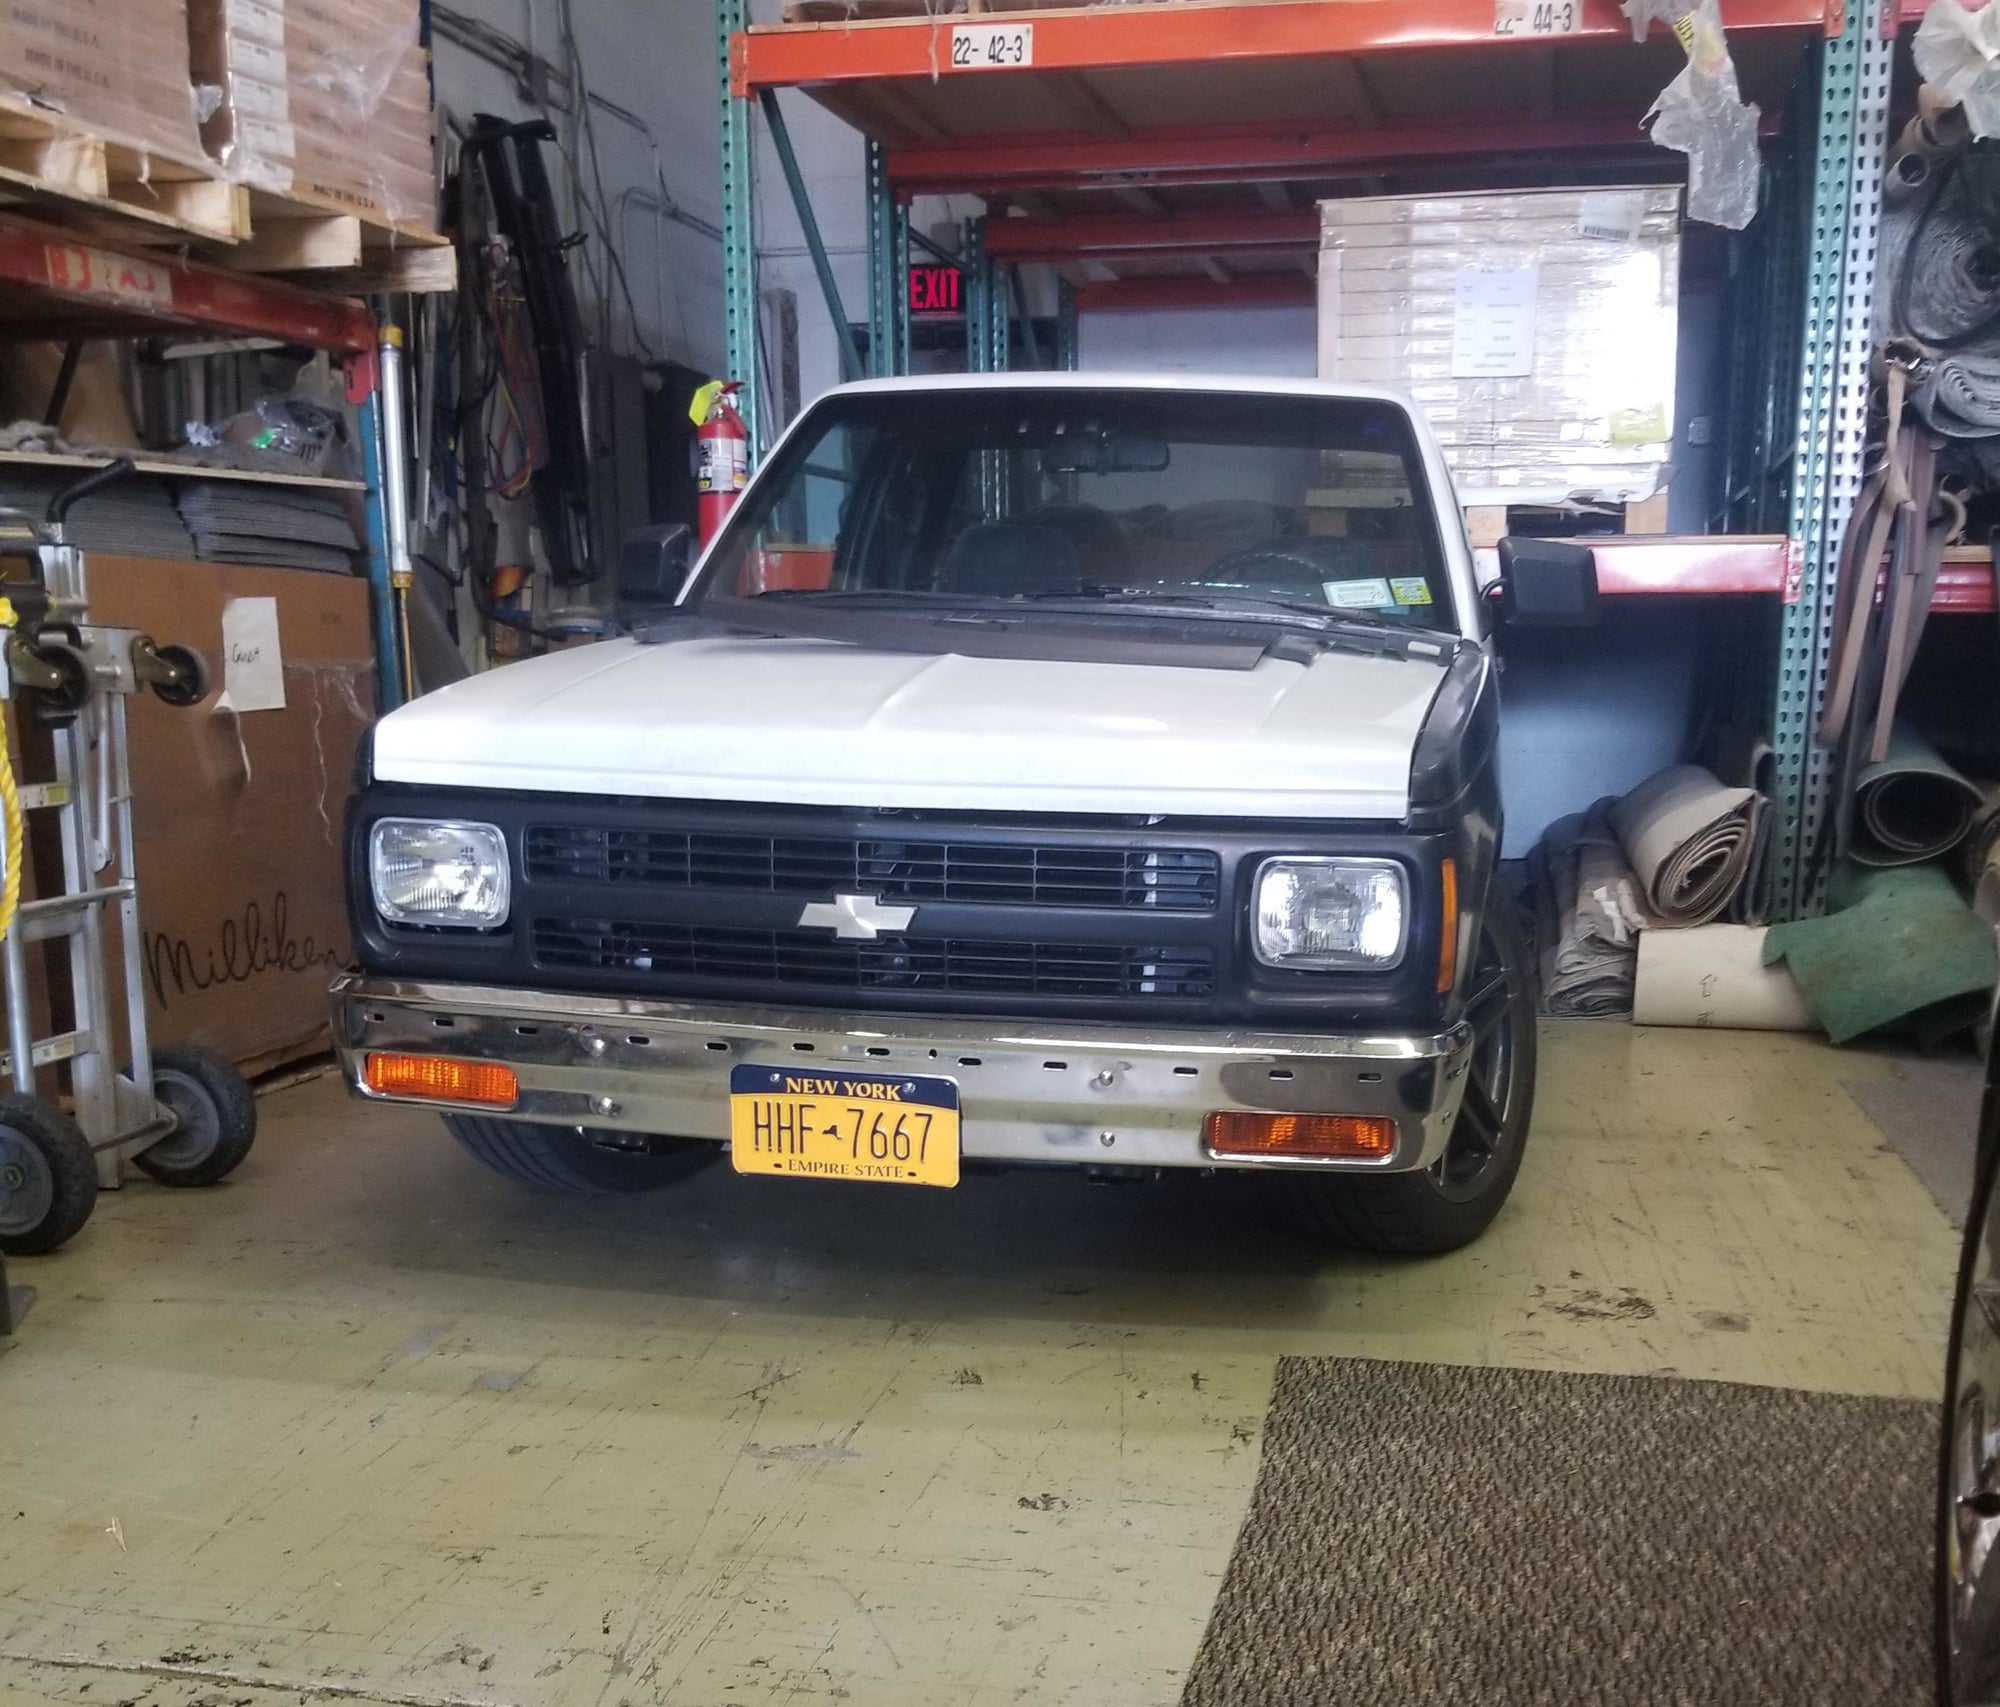 1992 Chevrolet S10 - Iron 408 stroker LS t56 magnum - Long Island, NY 11757, United States